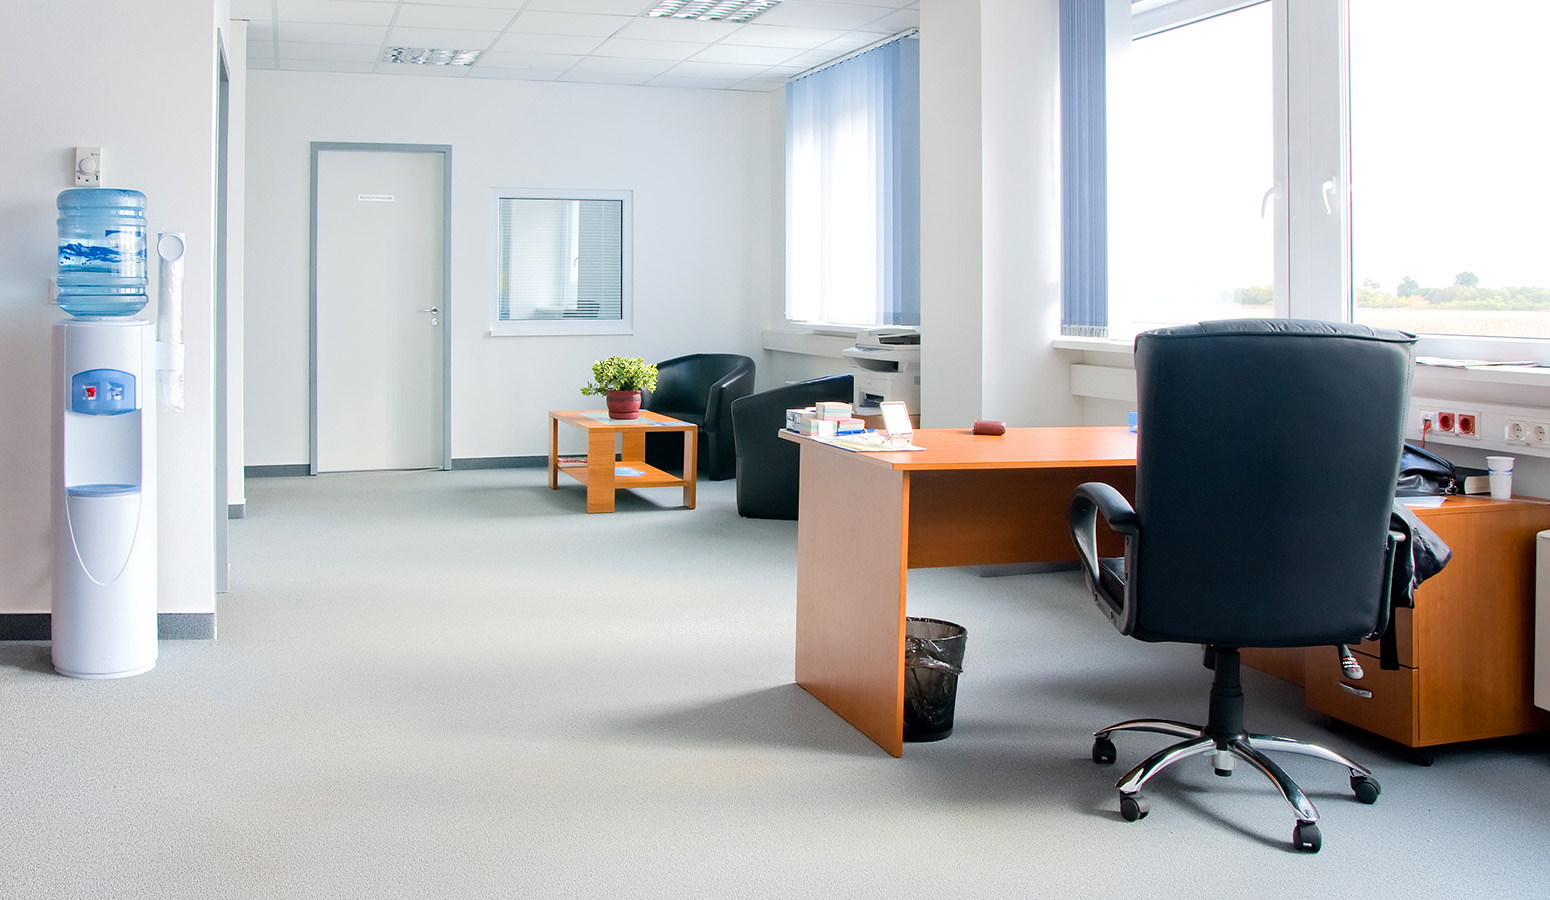 Keep Your Office Spotless with Professional Office Cleaning Services